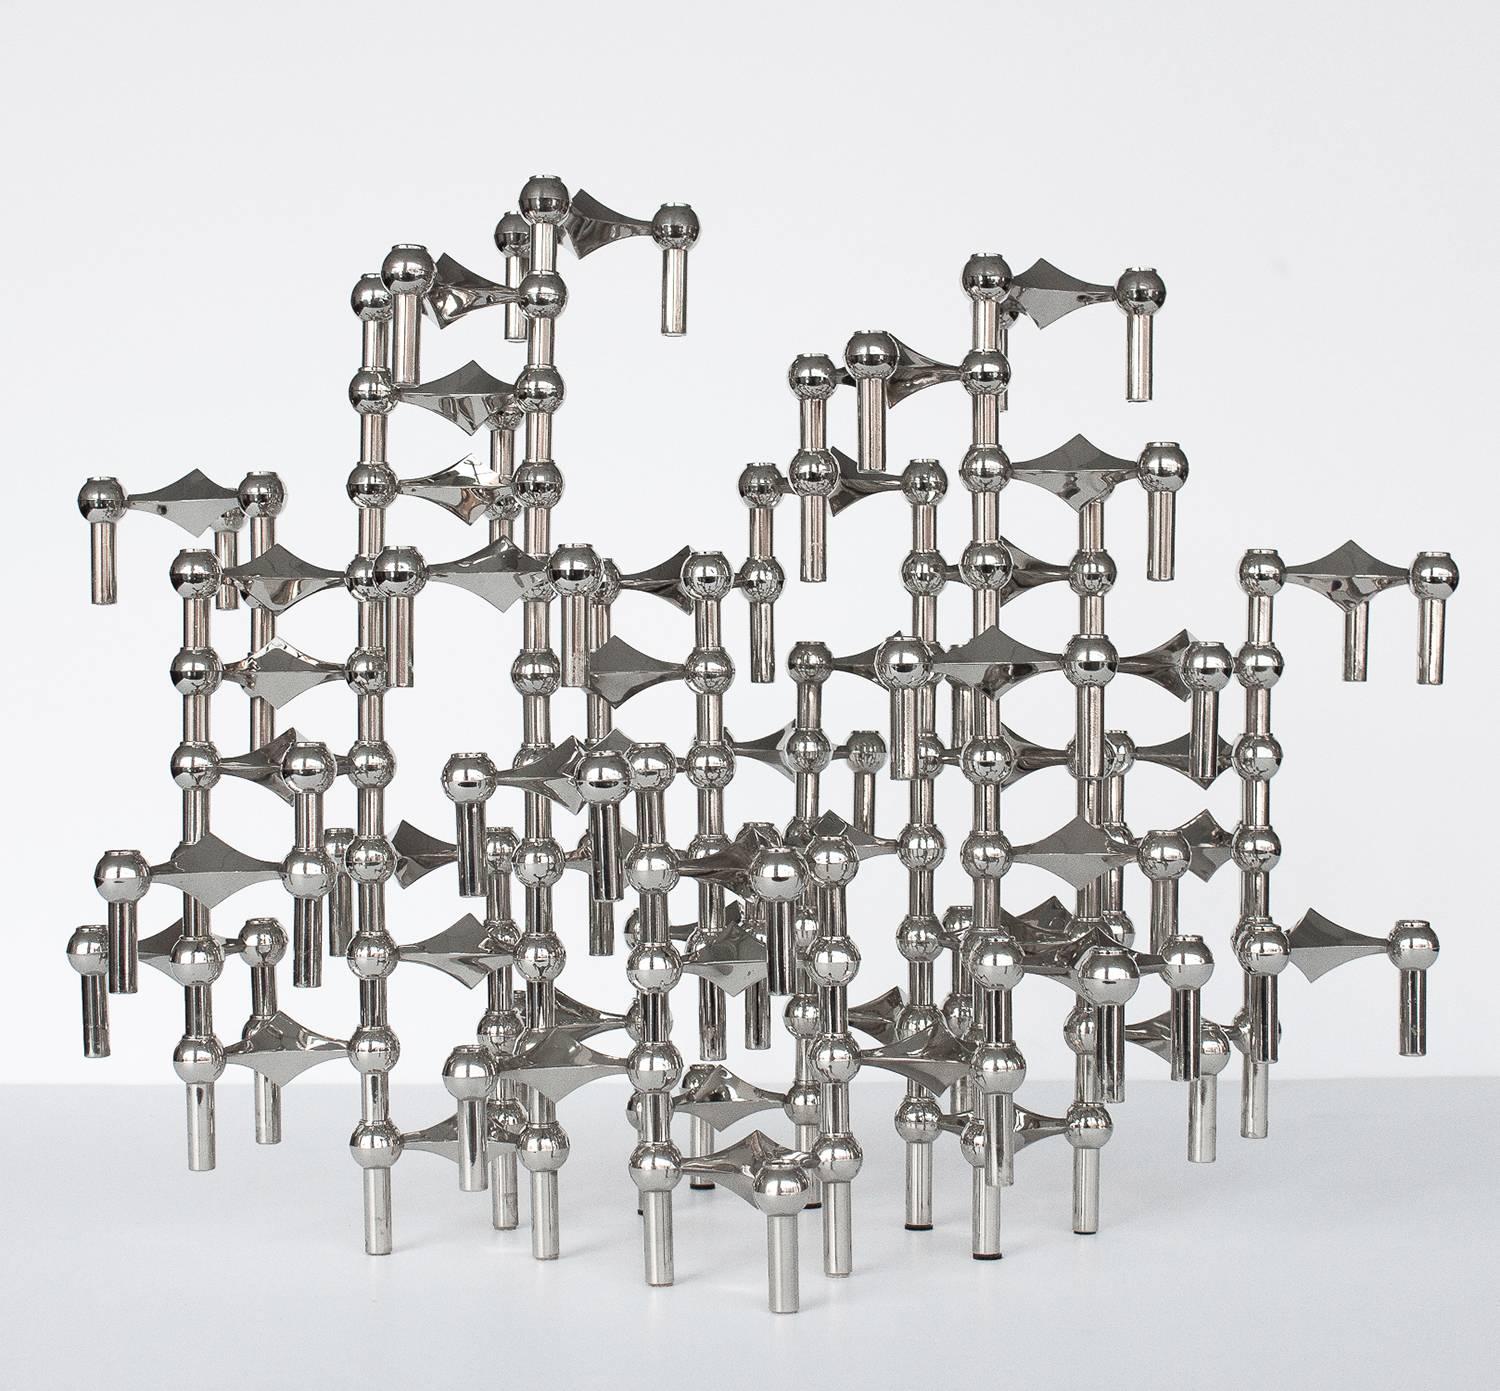 A sculpture made of 58 individual canleholders by Caesar Stoffi and Fritz Nagel for BMF, Germany. This modular design can be configured in an endless number of ways both vertically and horizontally by stacking each interlocking piece. Perfect as a